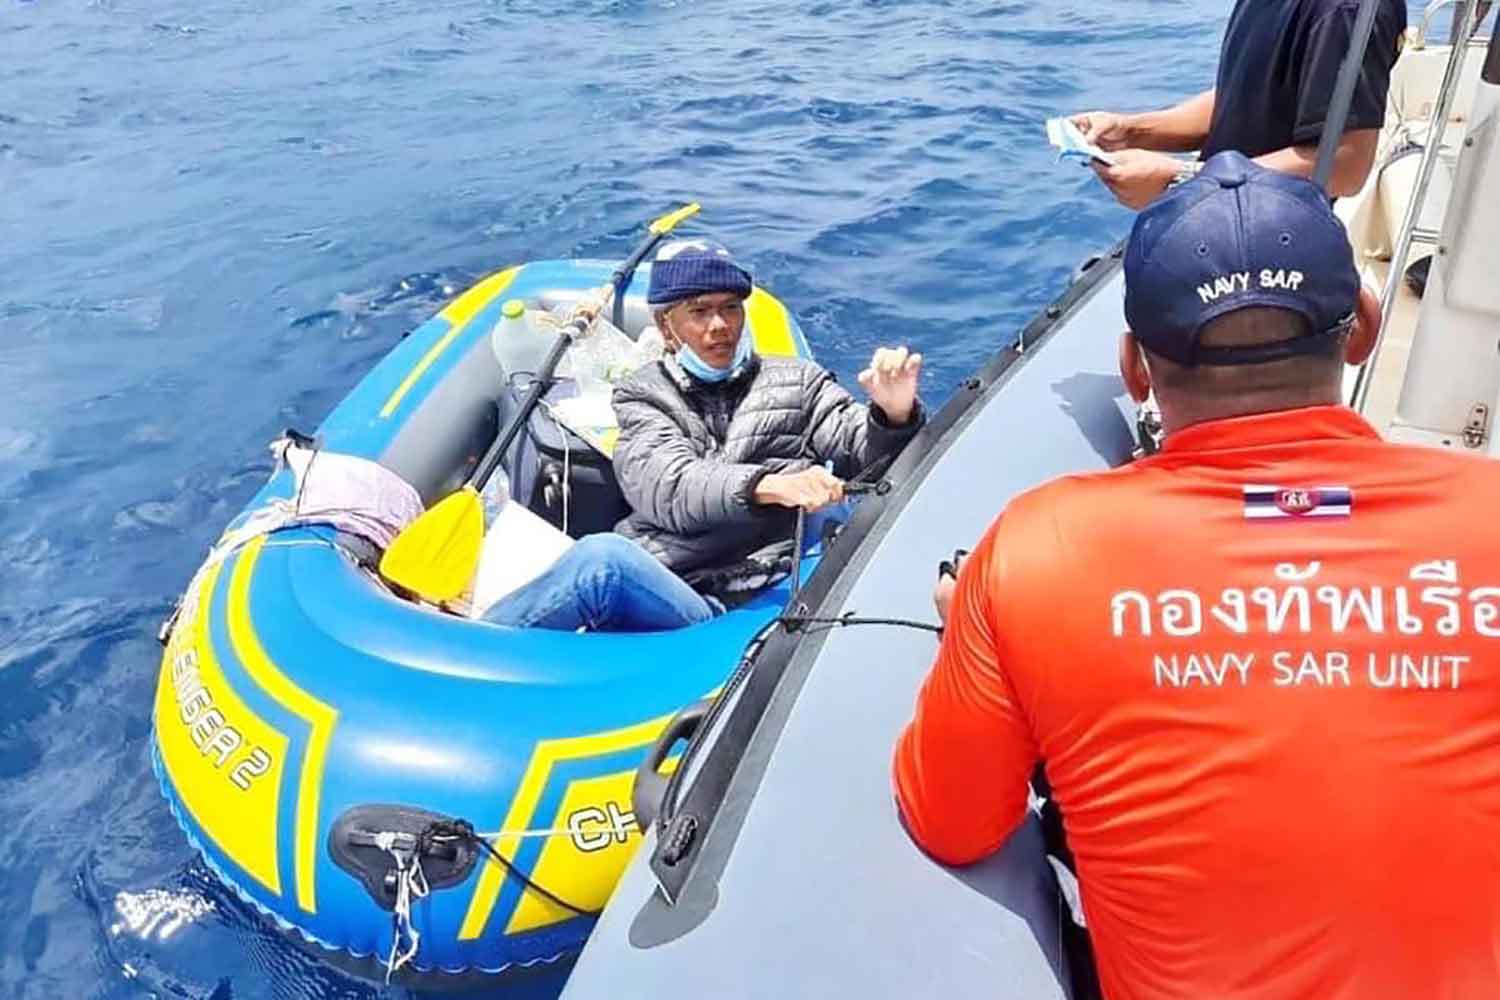 Man Rescued After Trying to Paddle to India in a 2.5 Meter Inflatable Boat